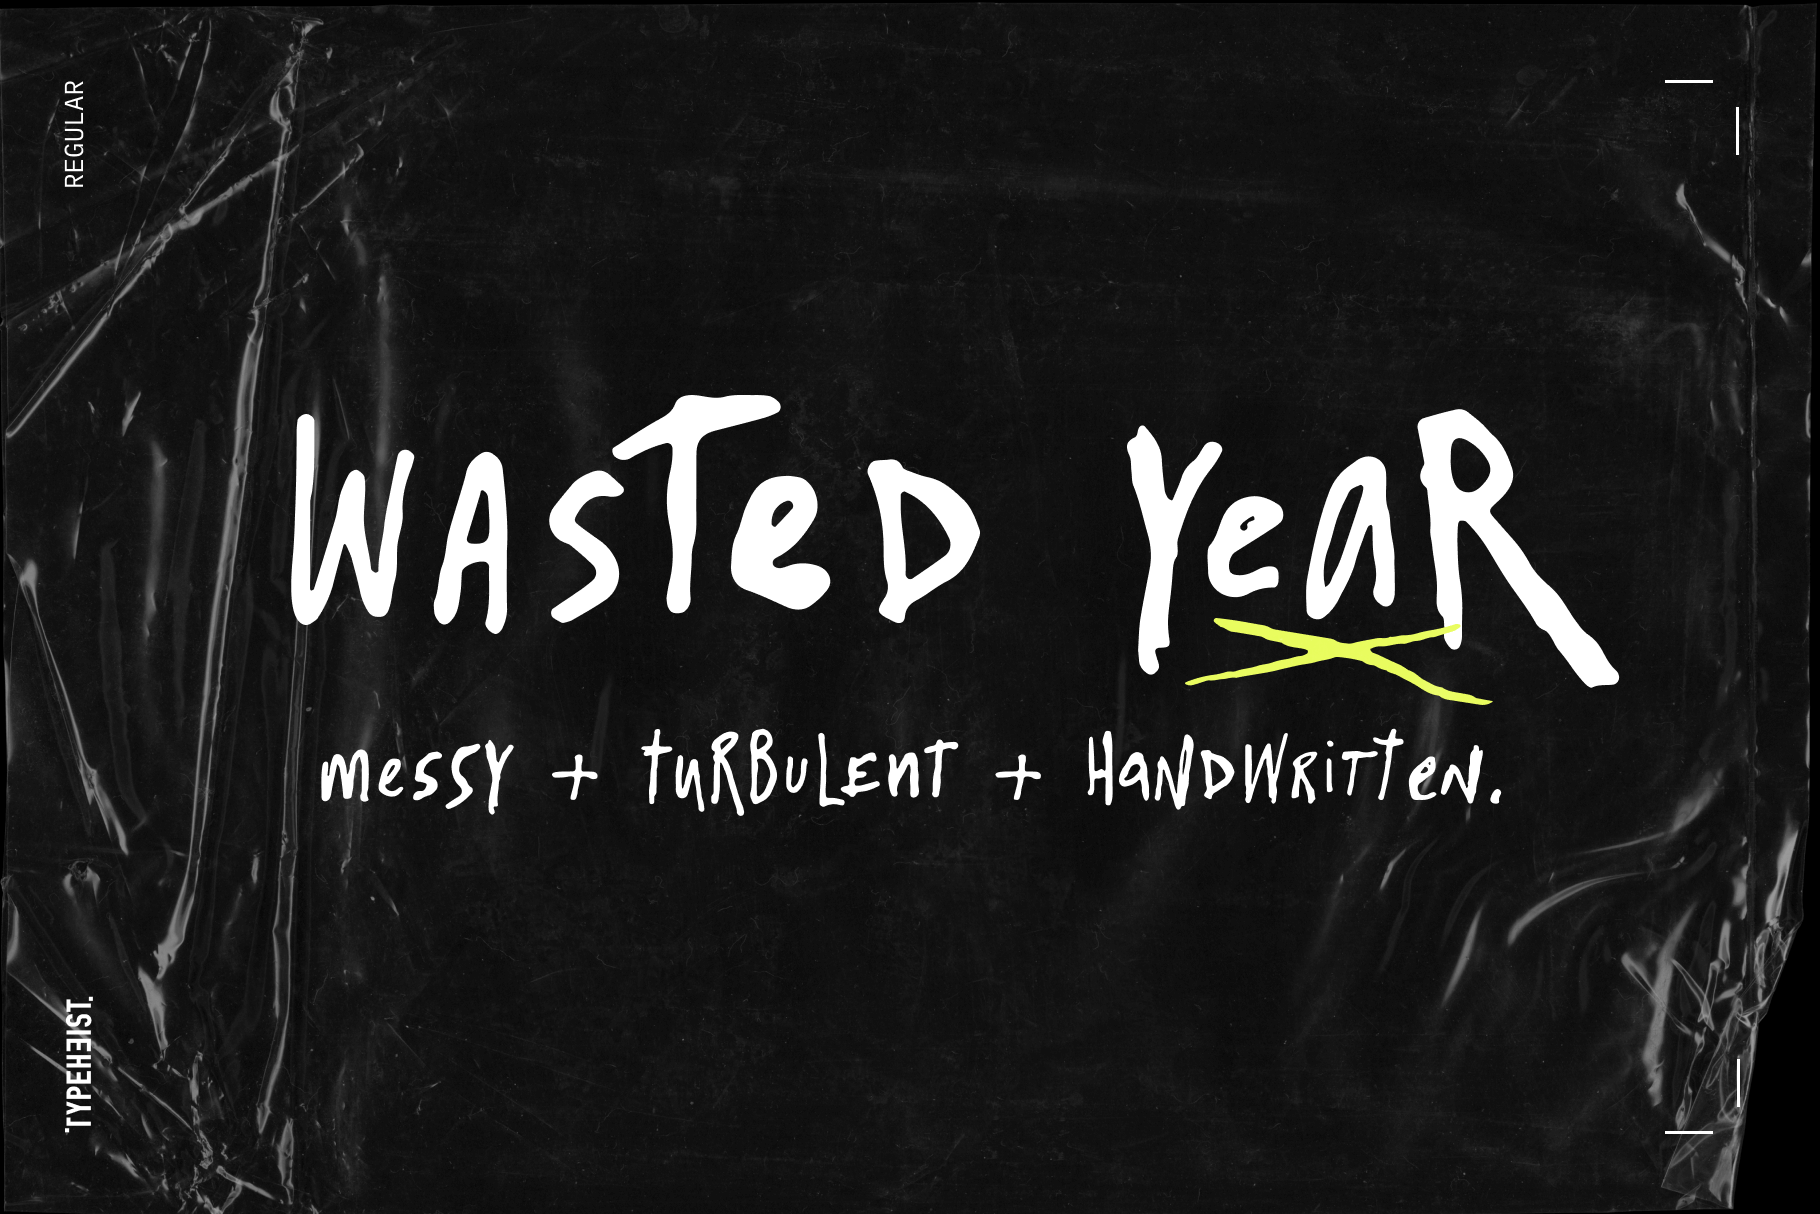 Wasted Year: It’s messy, turbulent, handwritten.